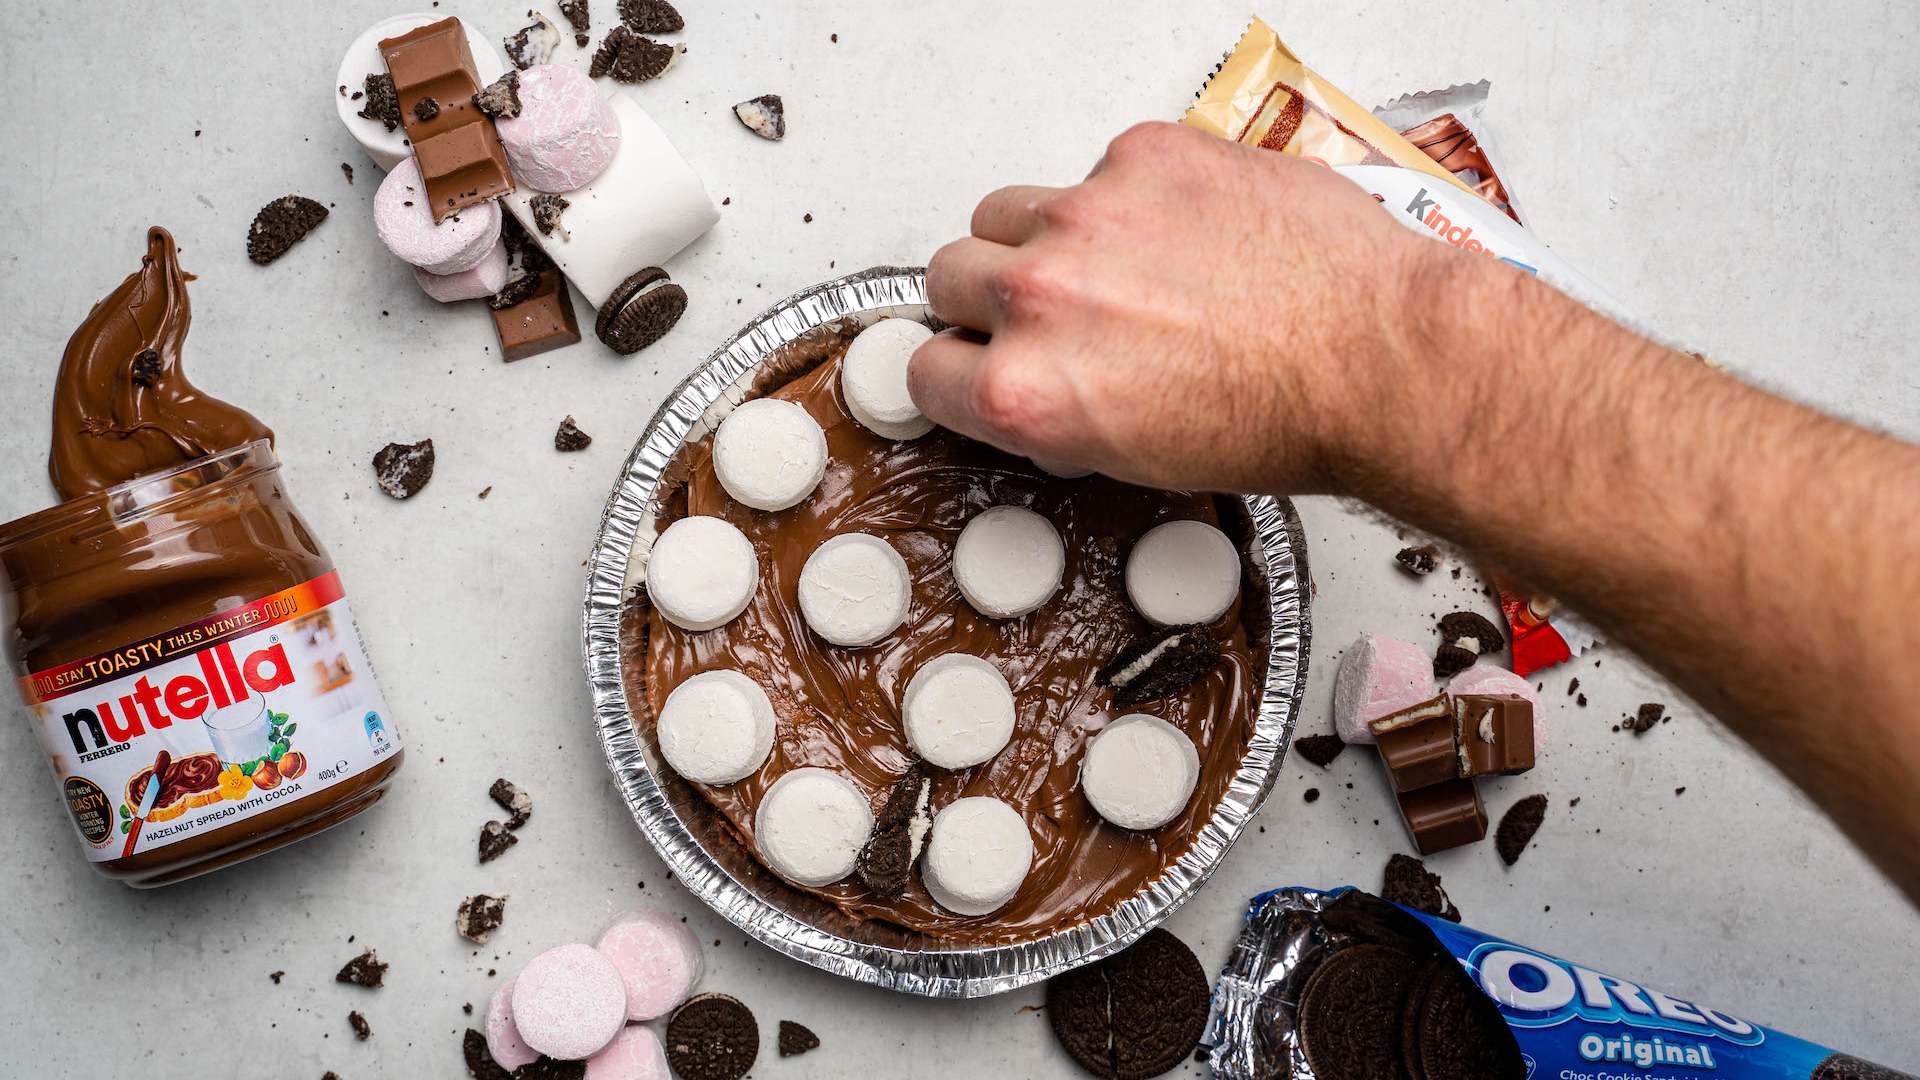 The Picnic Burwood's OTT New Bake-at-Home Cookie Pie Is the Dessert of Your Childhood Dreams